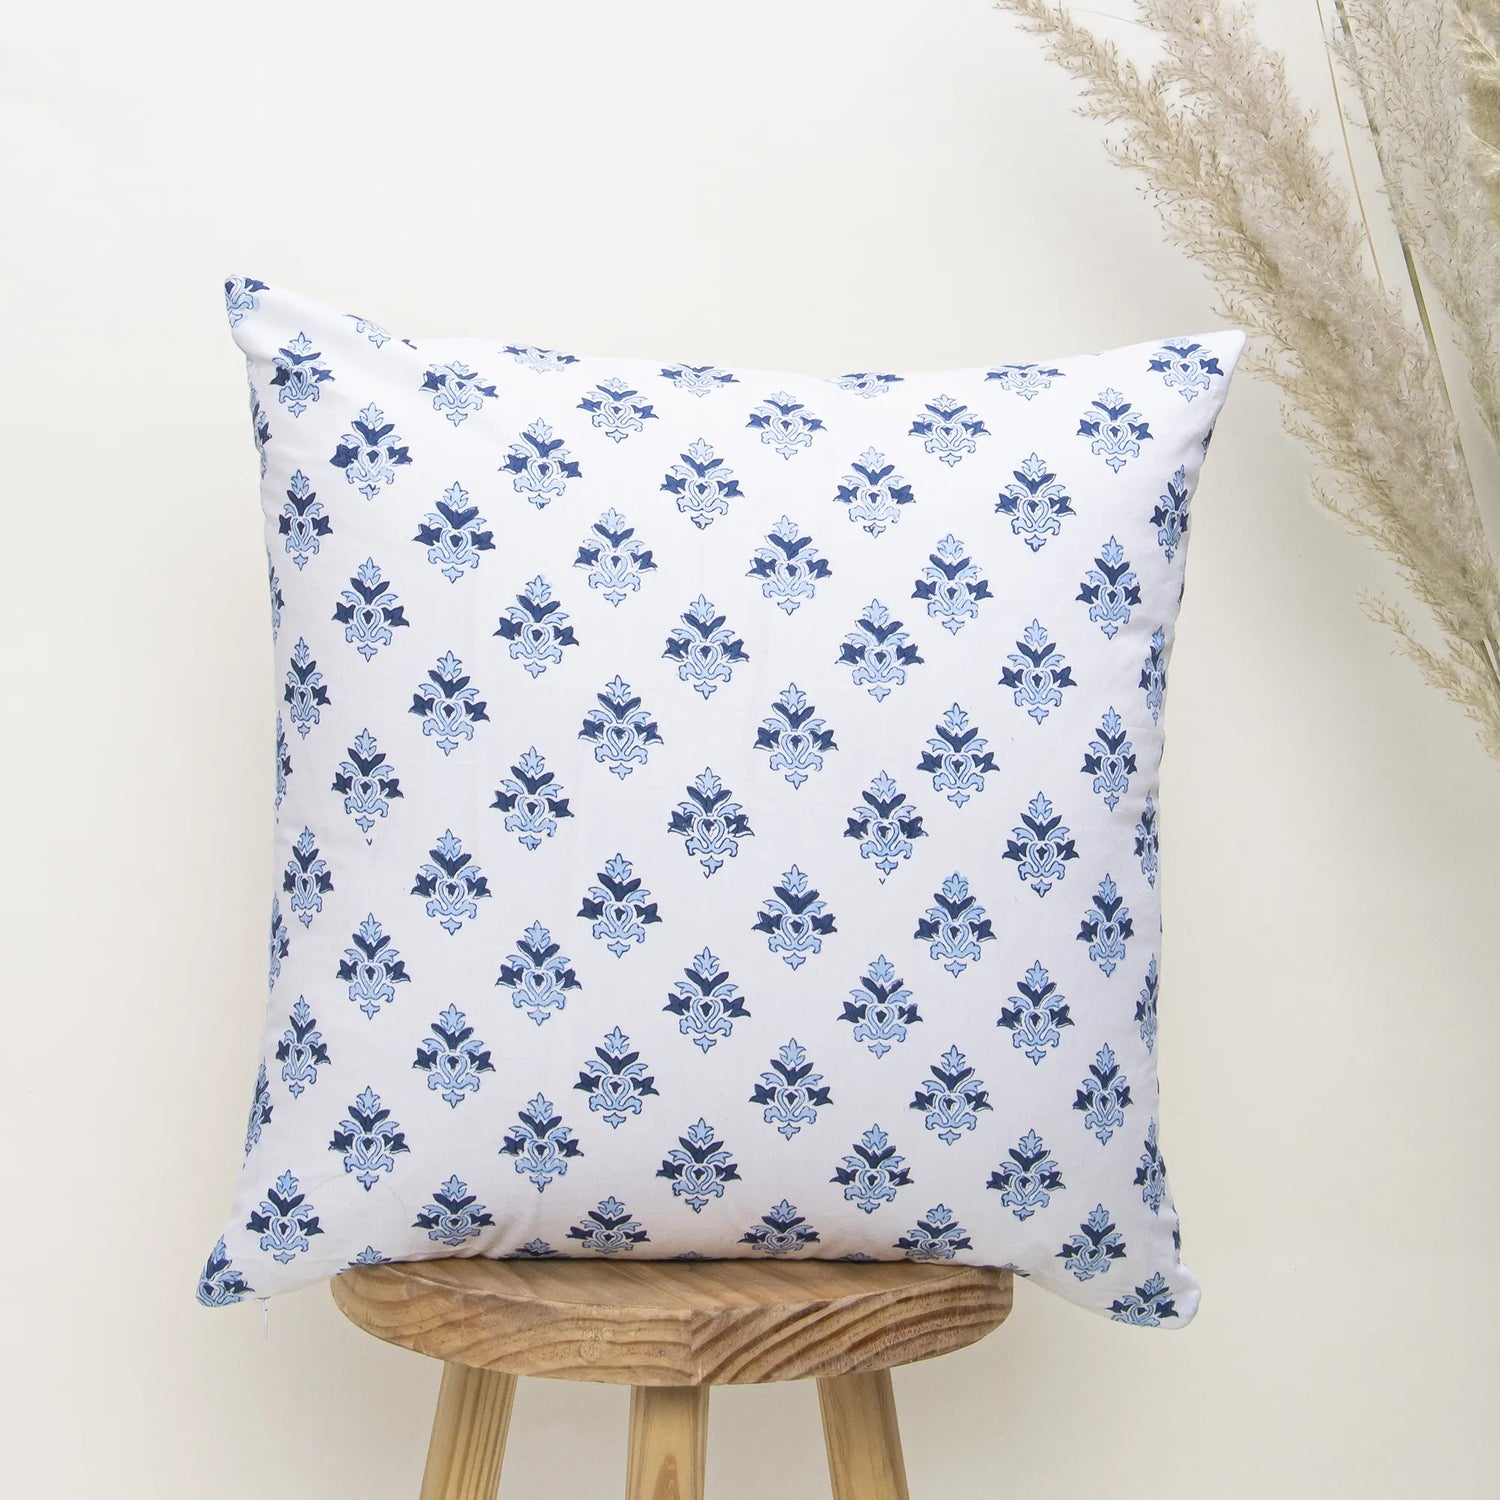 Indian Hand Block Print Cotton Booti Cushion Cover